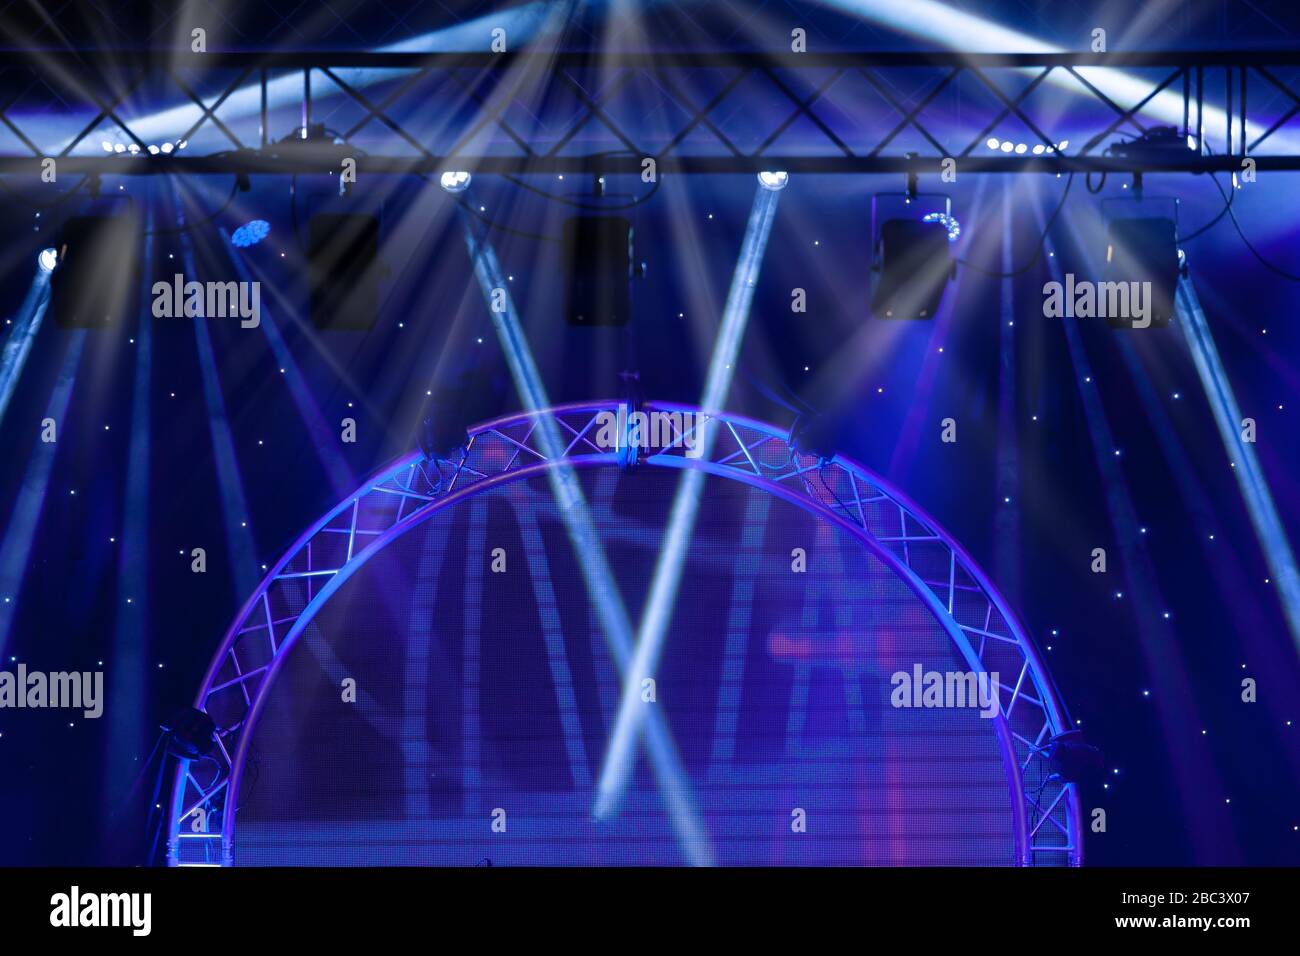 Blue Stage lights and Laser rays with smoky effect background Stock Photo